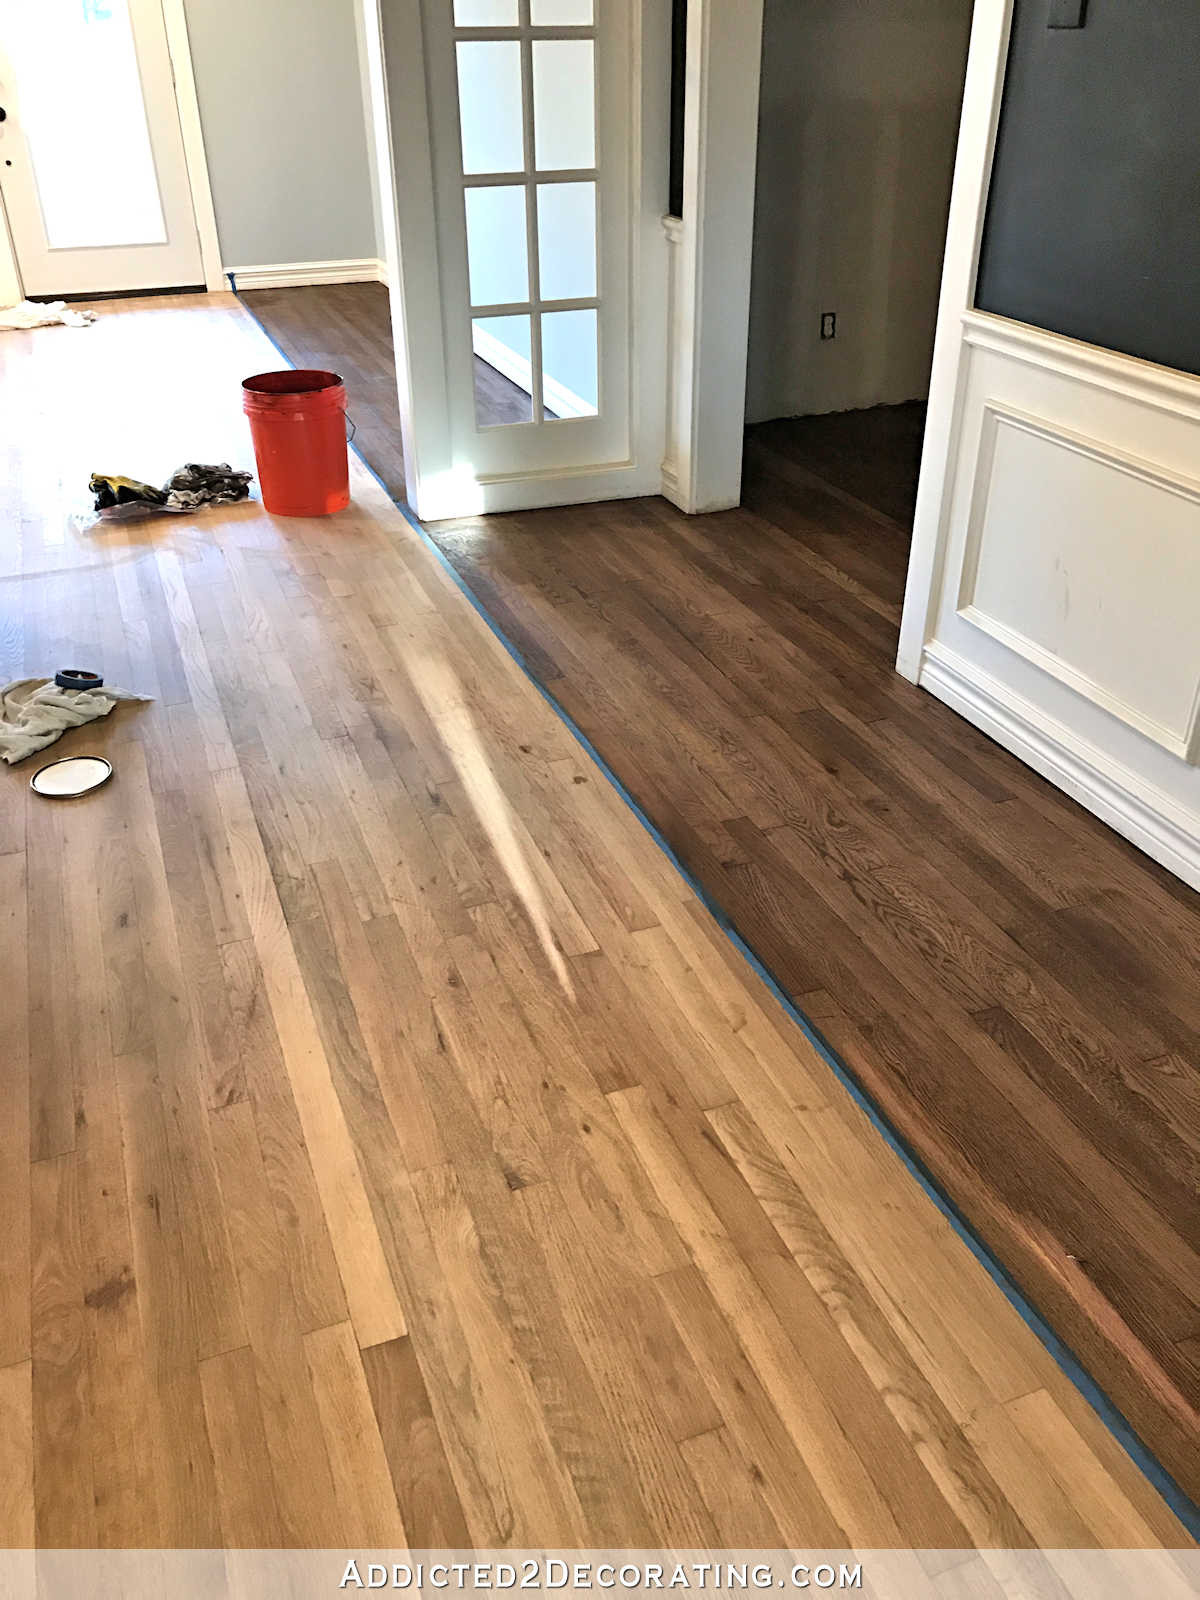 28 Wonderful Hardwood Floor Finishes Satin or Gloss 2024 free download hardwood floor finishes satin or gloss of adventures in staining my red oak hardwood floors products process in staining red oak hardwood floors 6 stain on partial floor in entryway and musi